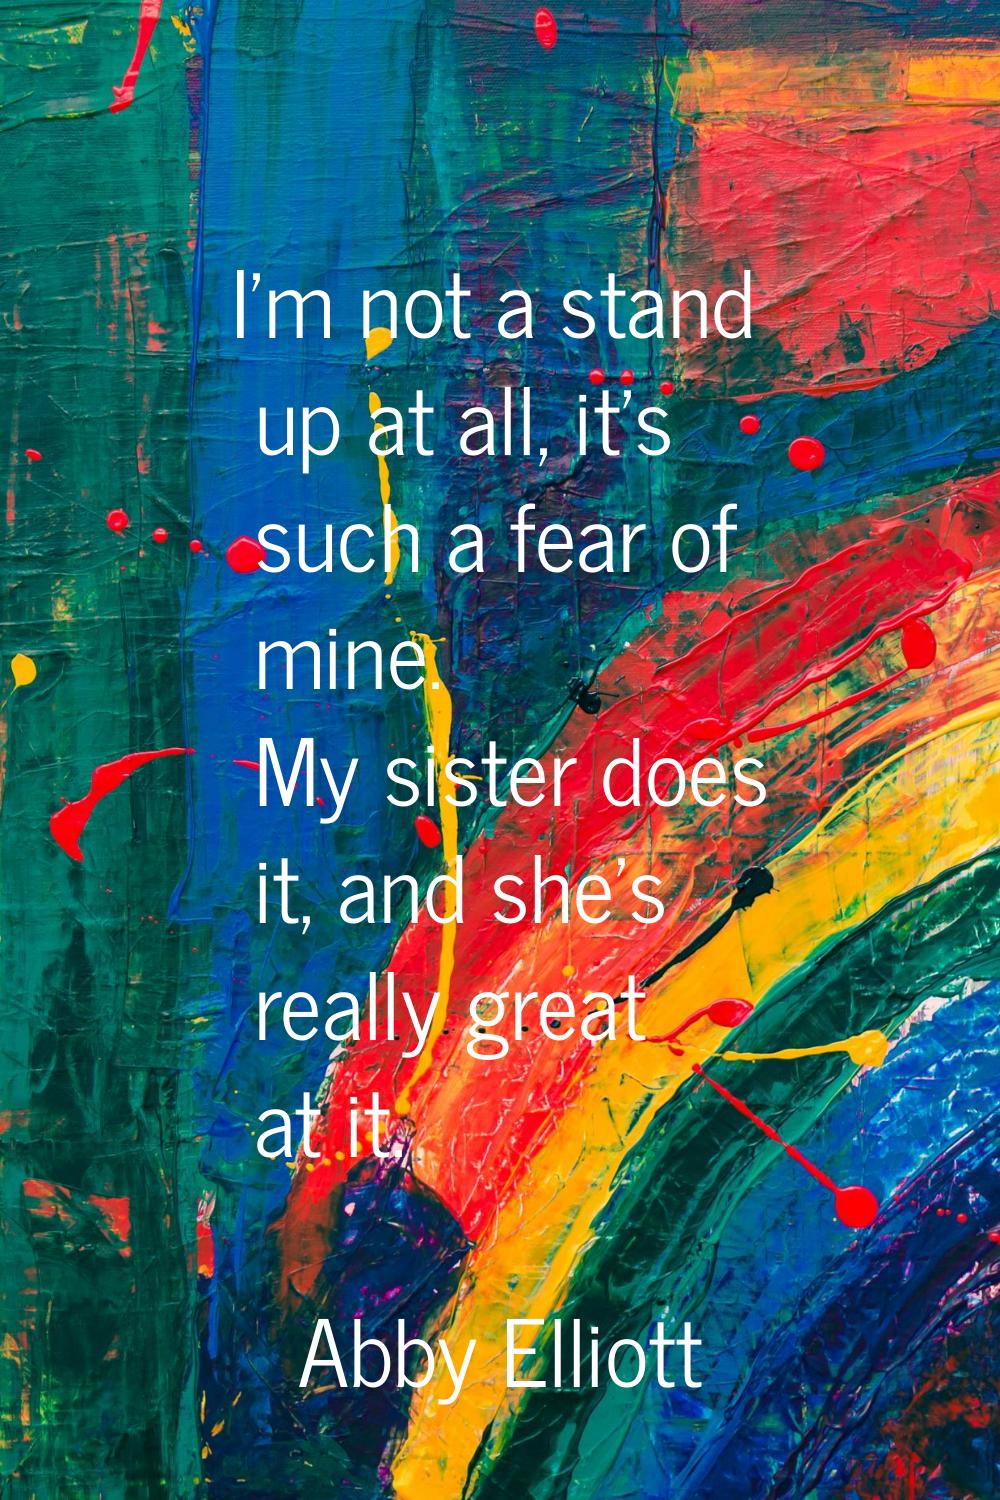 I'm not a stand up at all, it's such a fear of mine. My sister does it, and she's really great at i